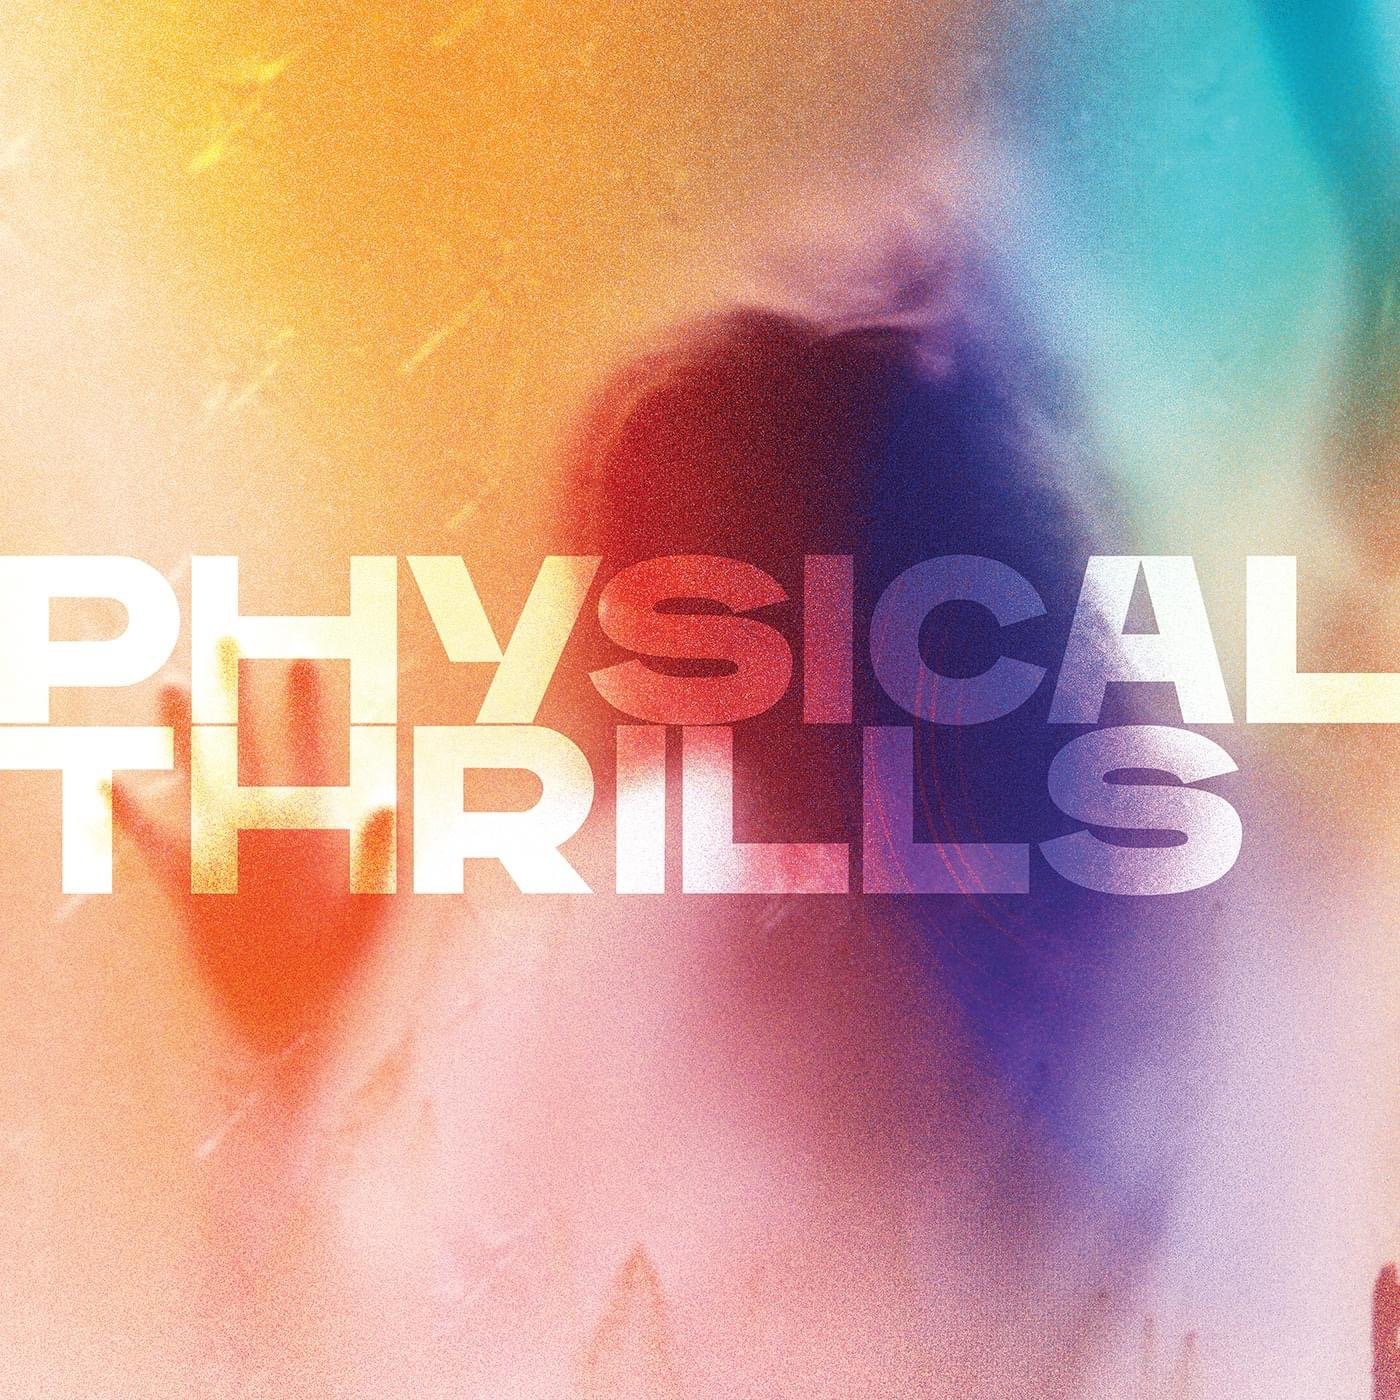 Silversun Pickups - Physical Thrills (2022) FLAC Download